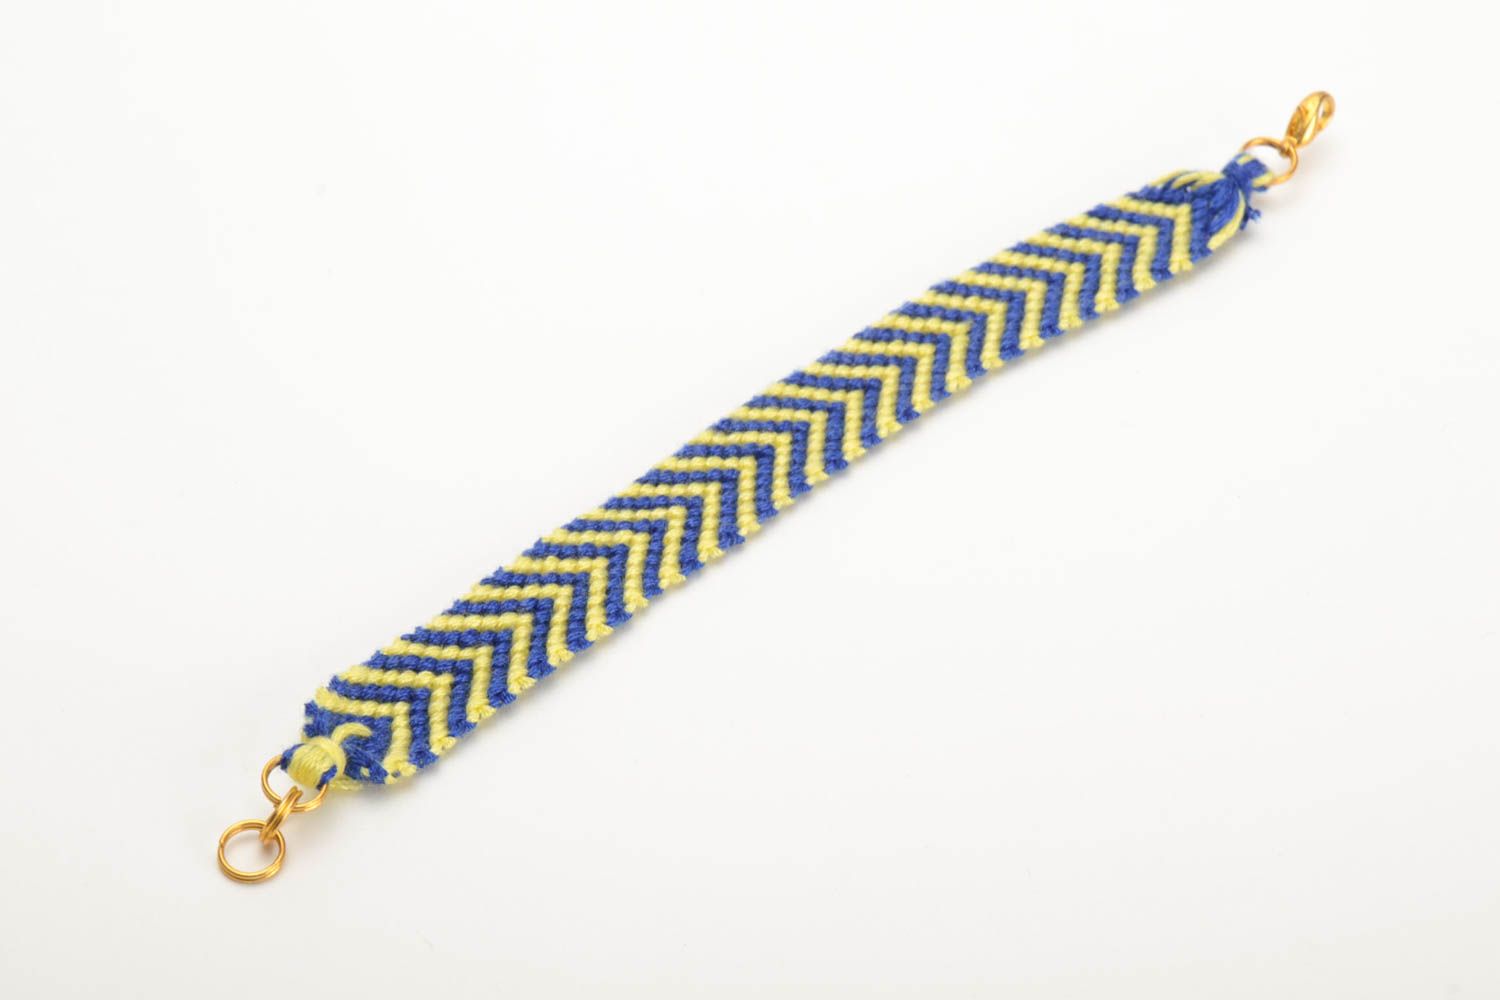 Braided handmade friendship bracelet made of floss thread delicate beautiful yellow and blue accessory photo 4